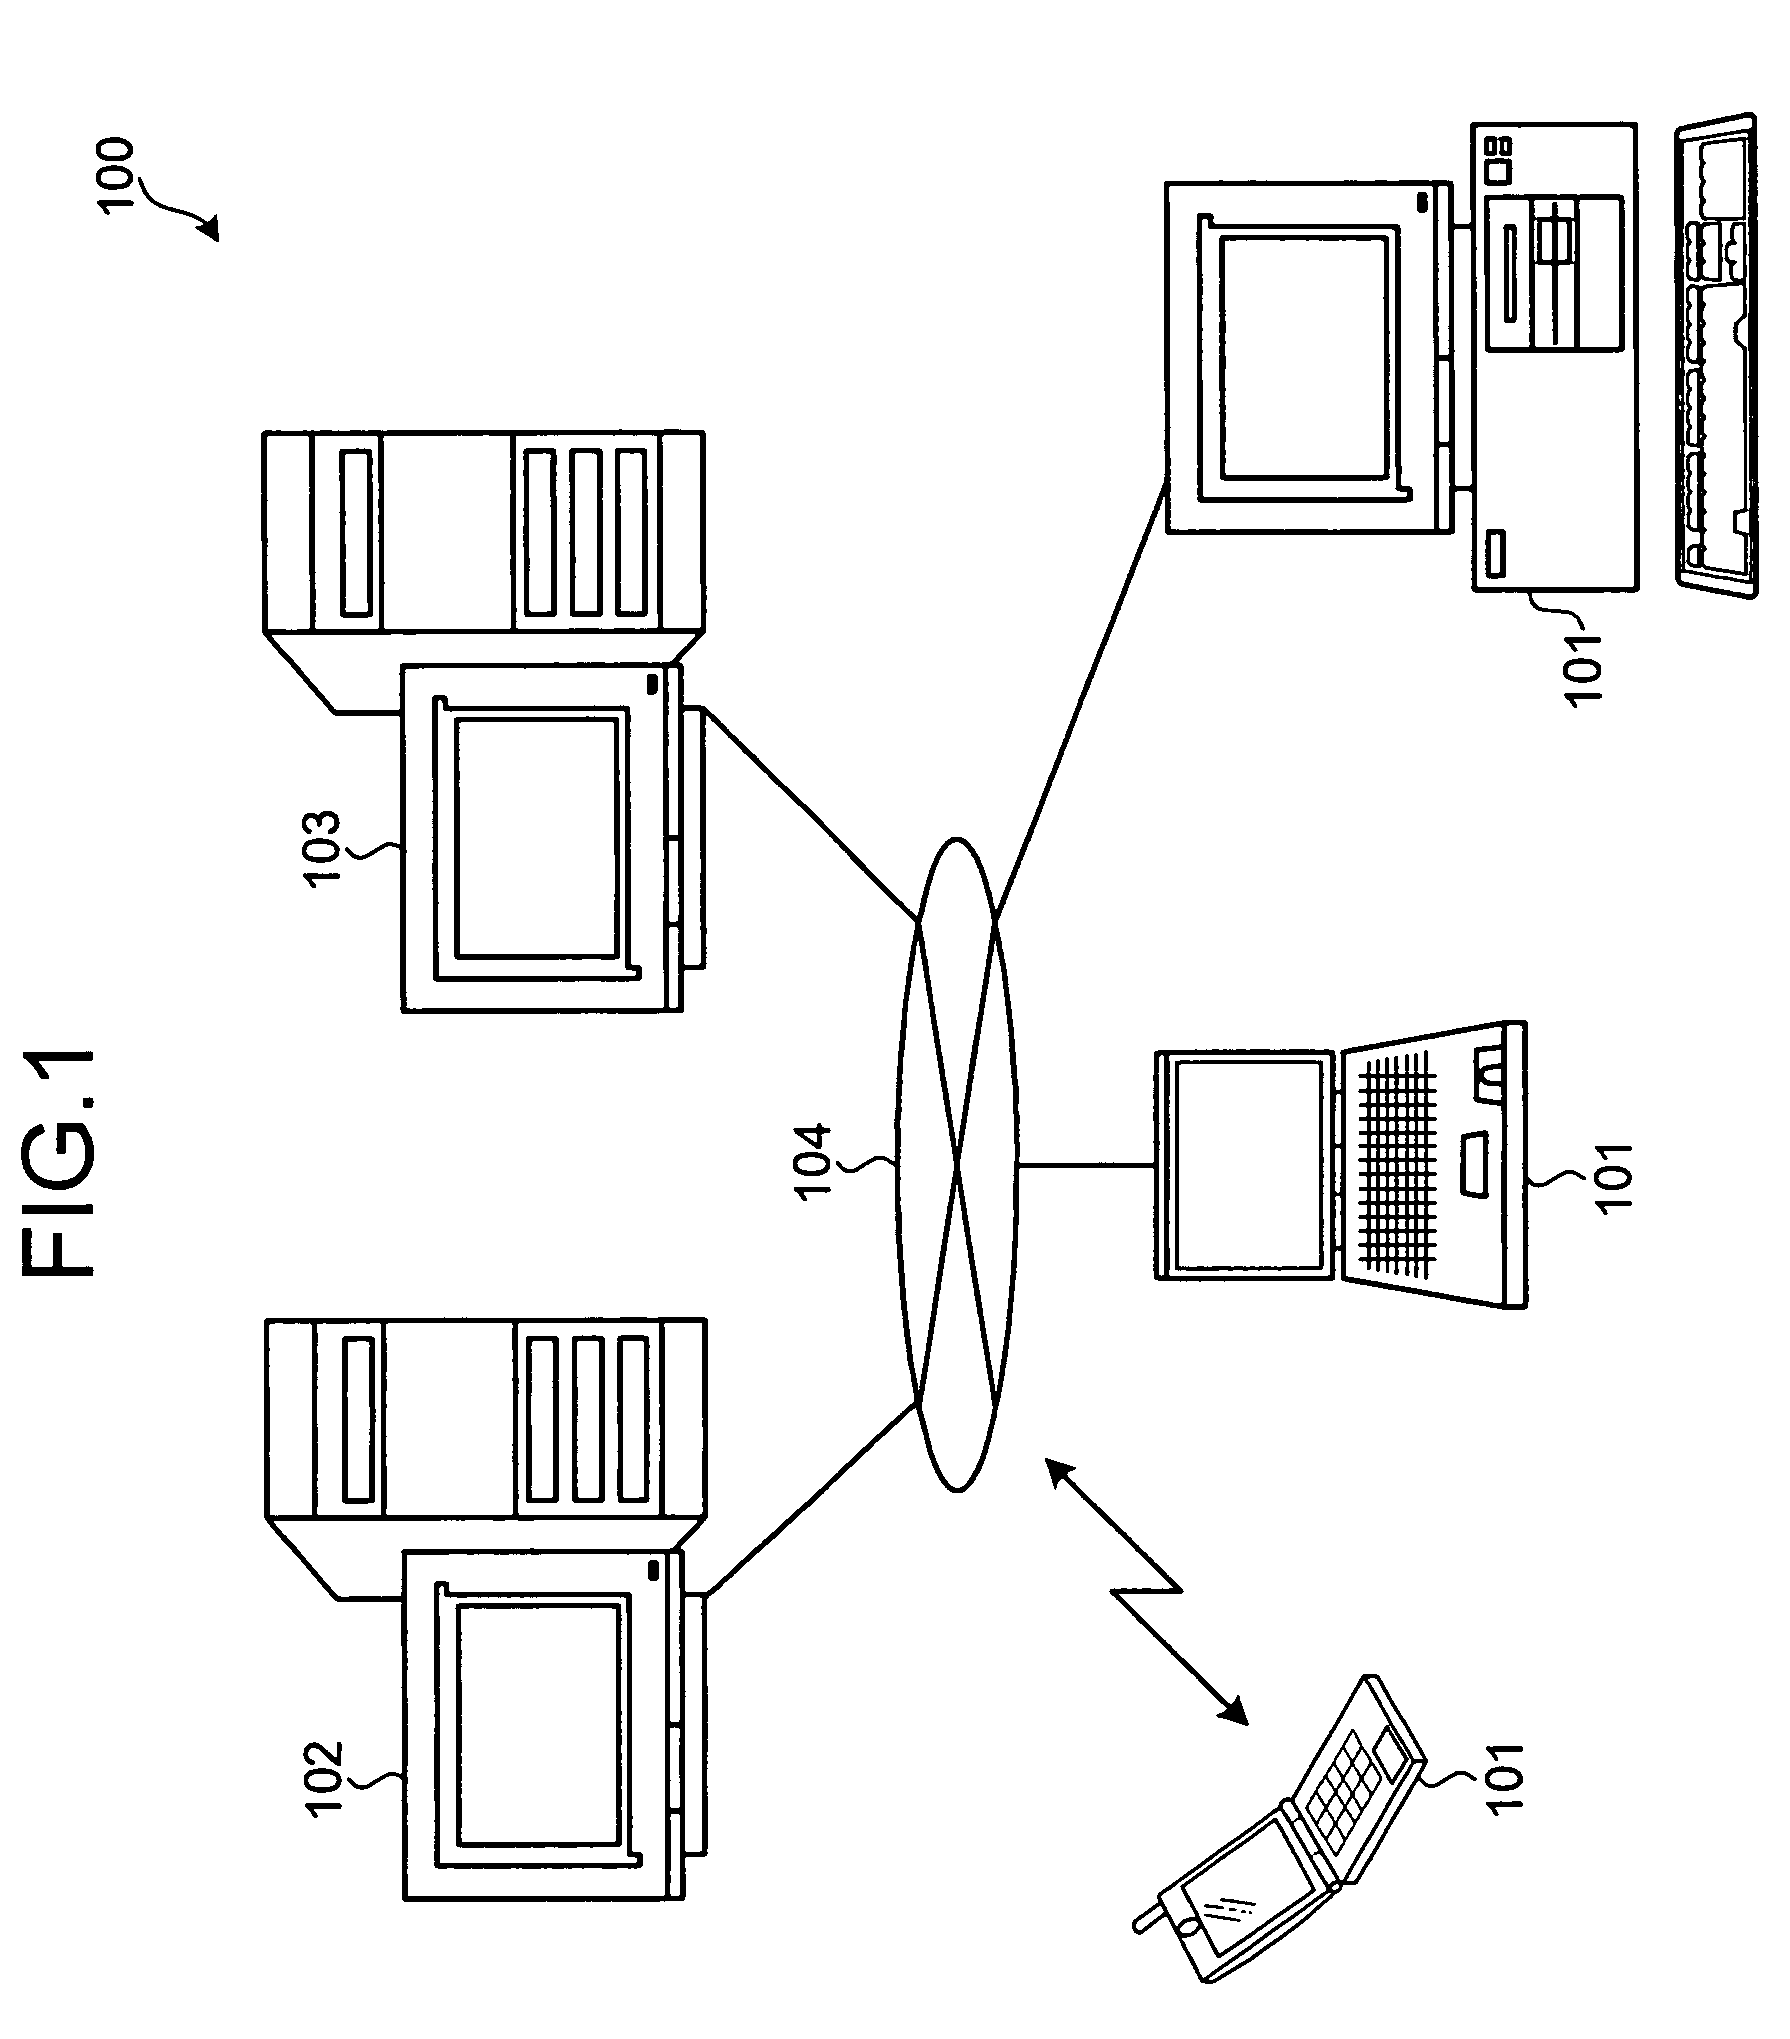 Data managing device equipped with various authentication functions